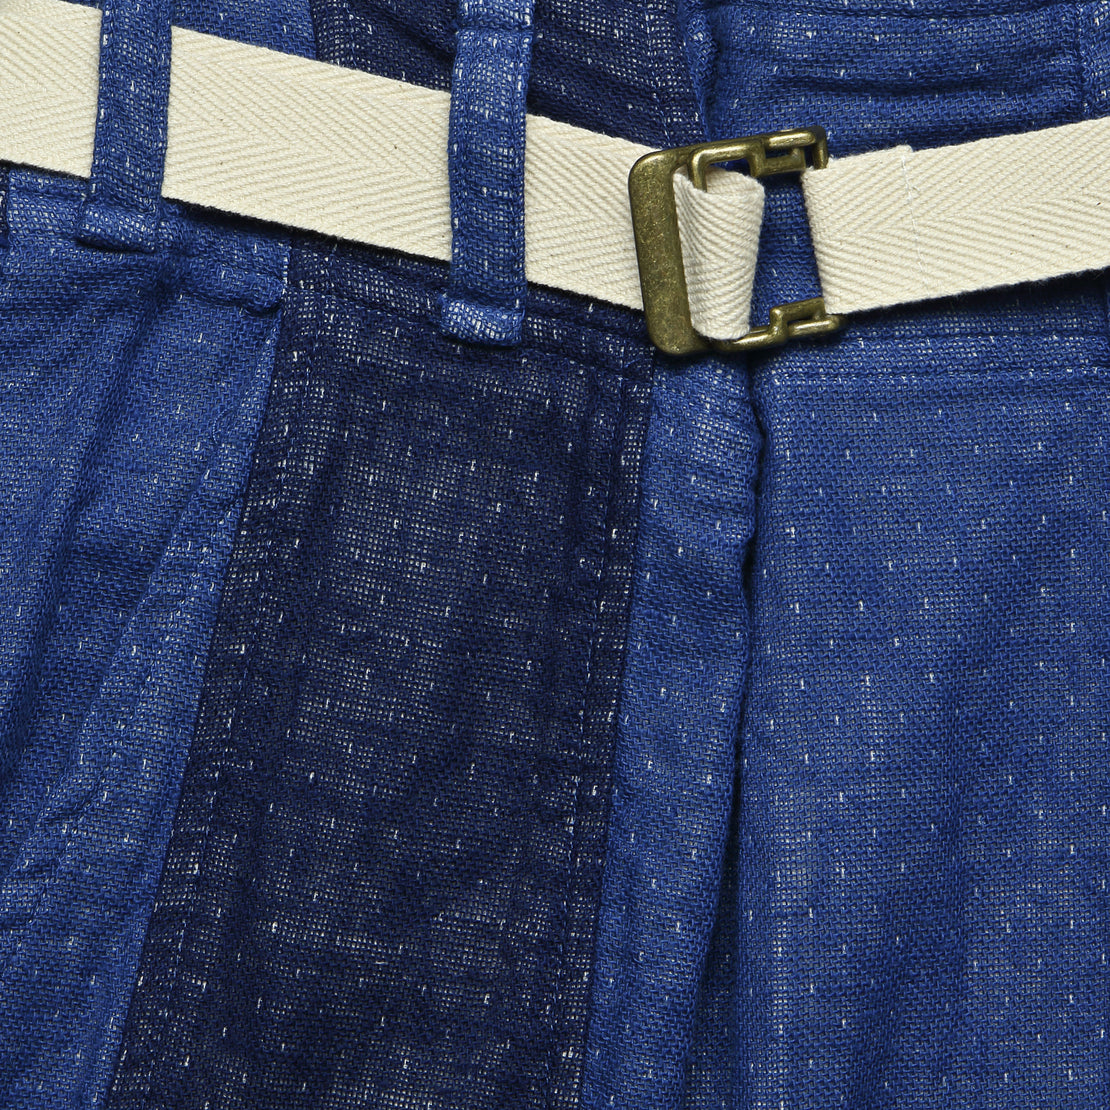 Giselle Pant - Indigo Patchwork - Atelier Delphine - STAG Provisions - W - Pants - Twill